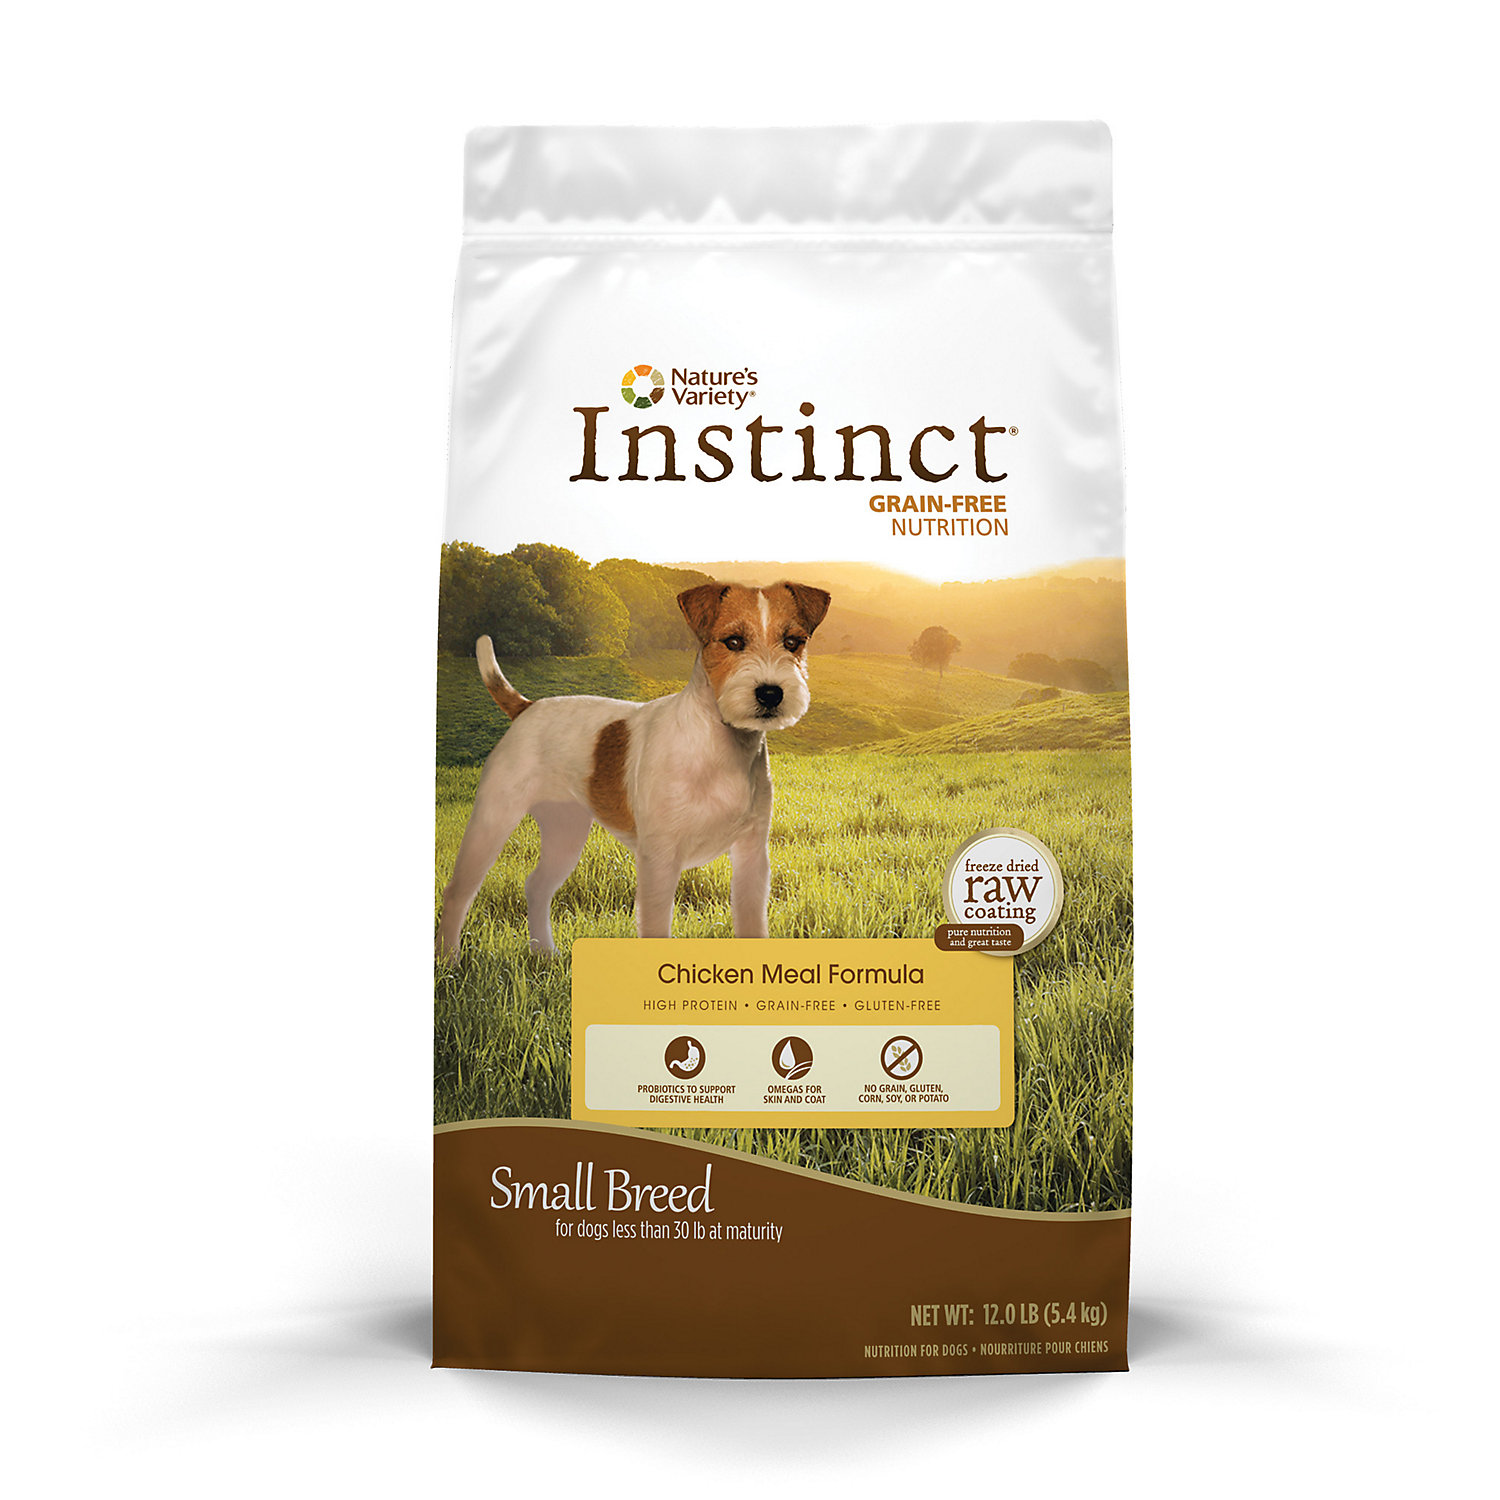 Nature's Variety Instinct Grain-Free Chicken Meal Formula Kibble for Small Breed Dogs